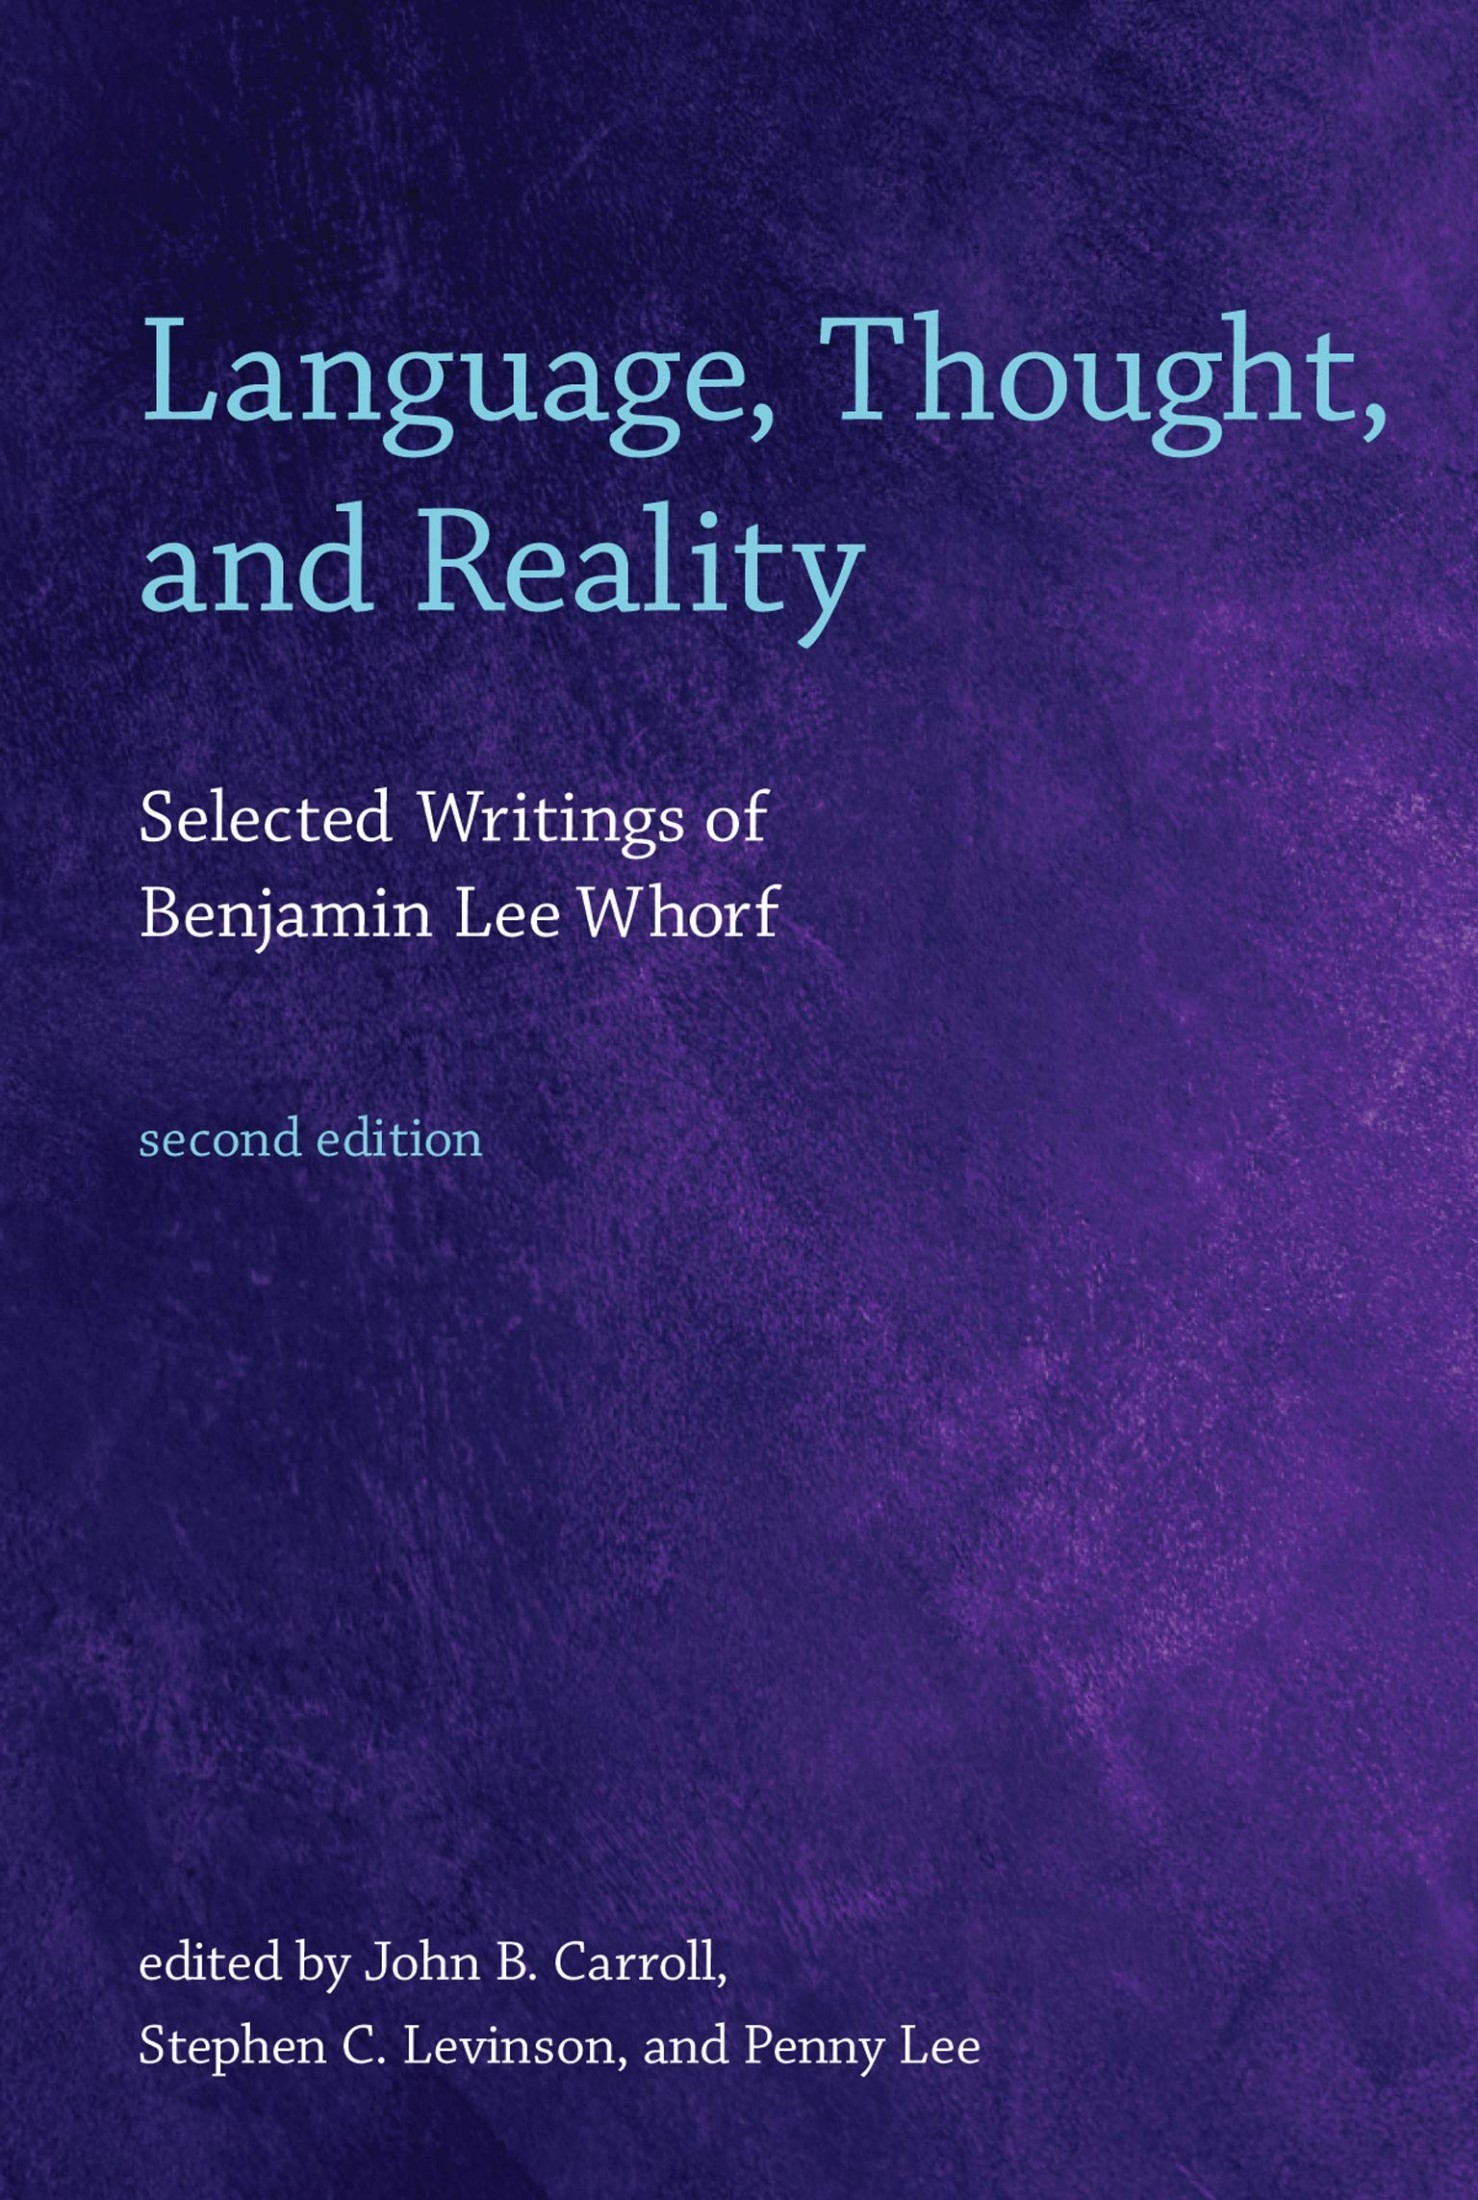 Language, Thought, and Reality: Selected Writings. with an Introduction. Foreword by Stuart Chase